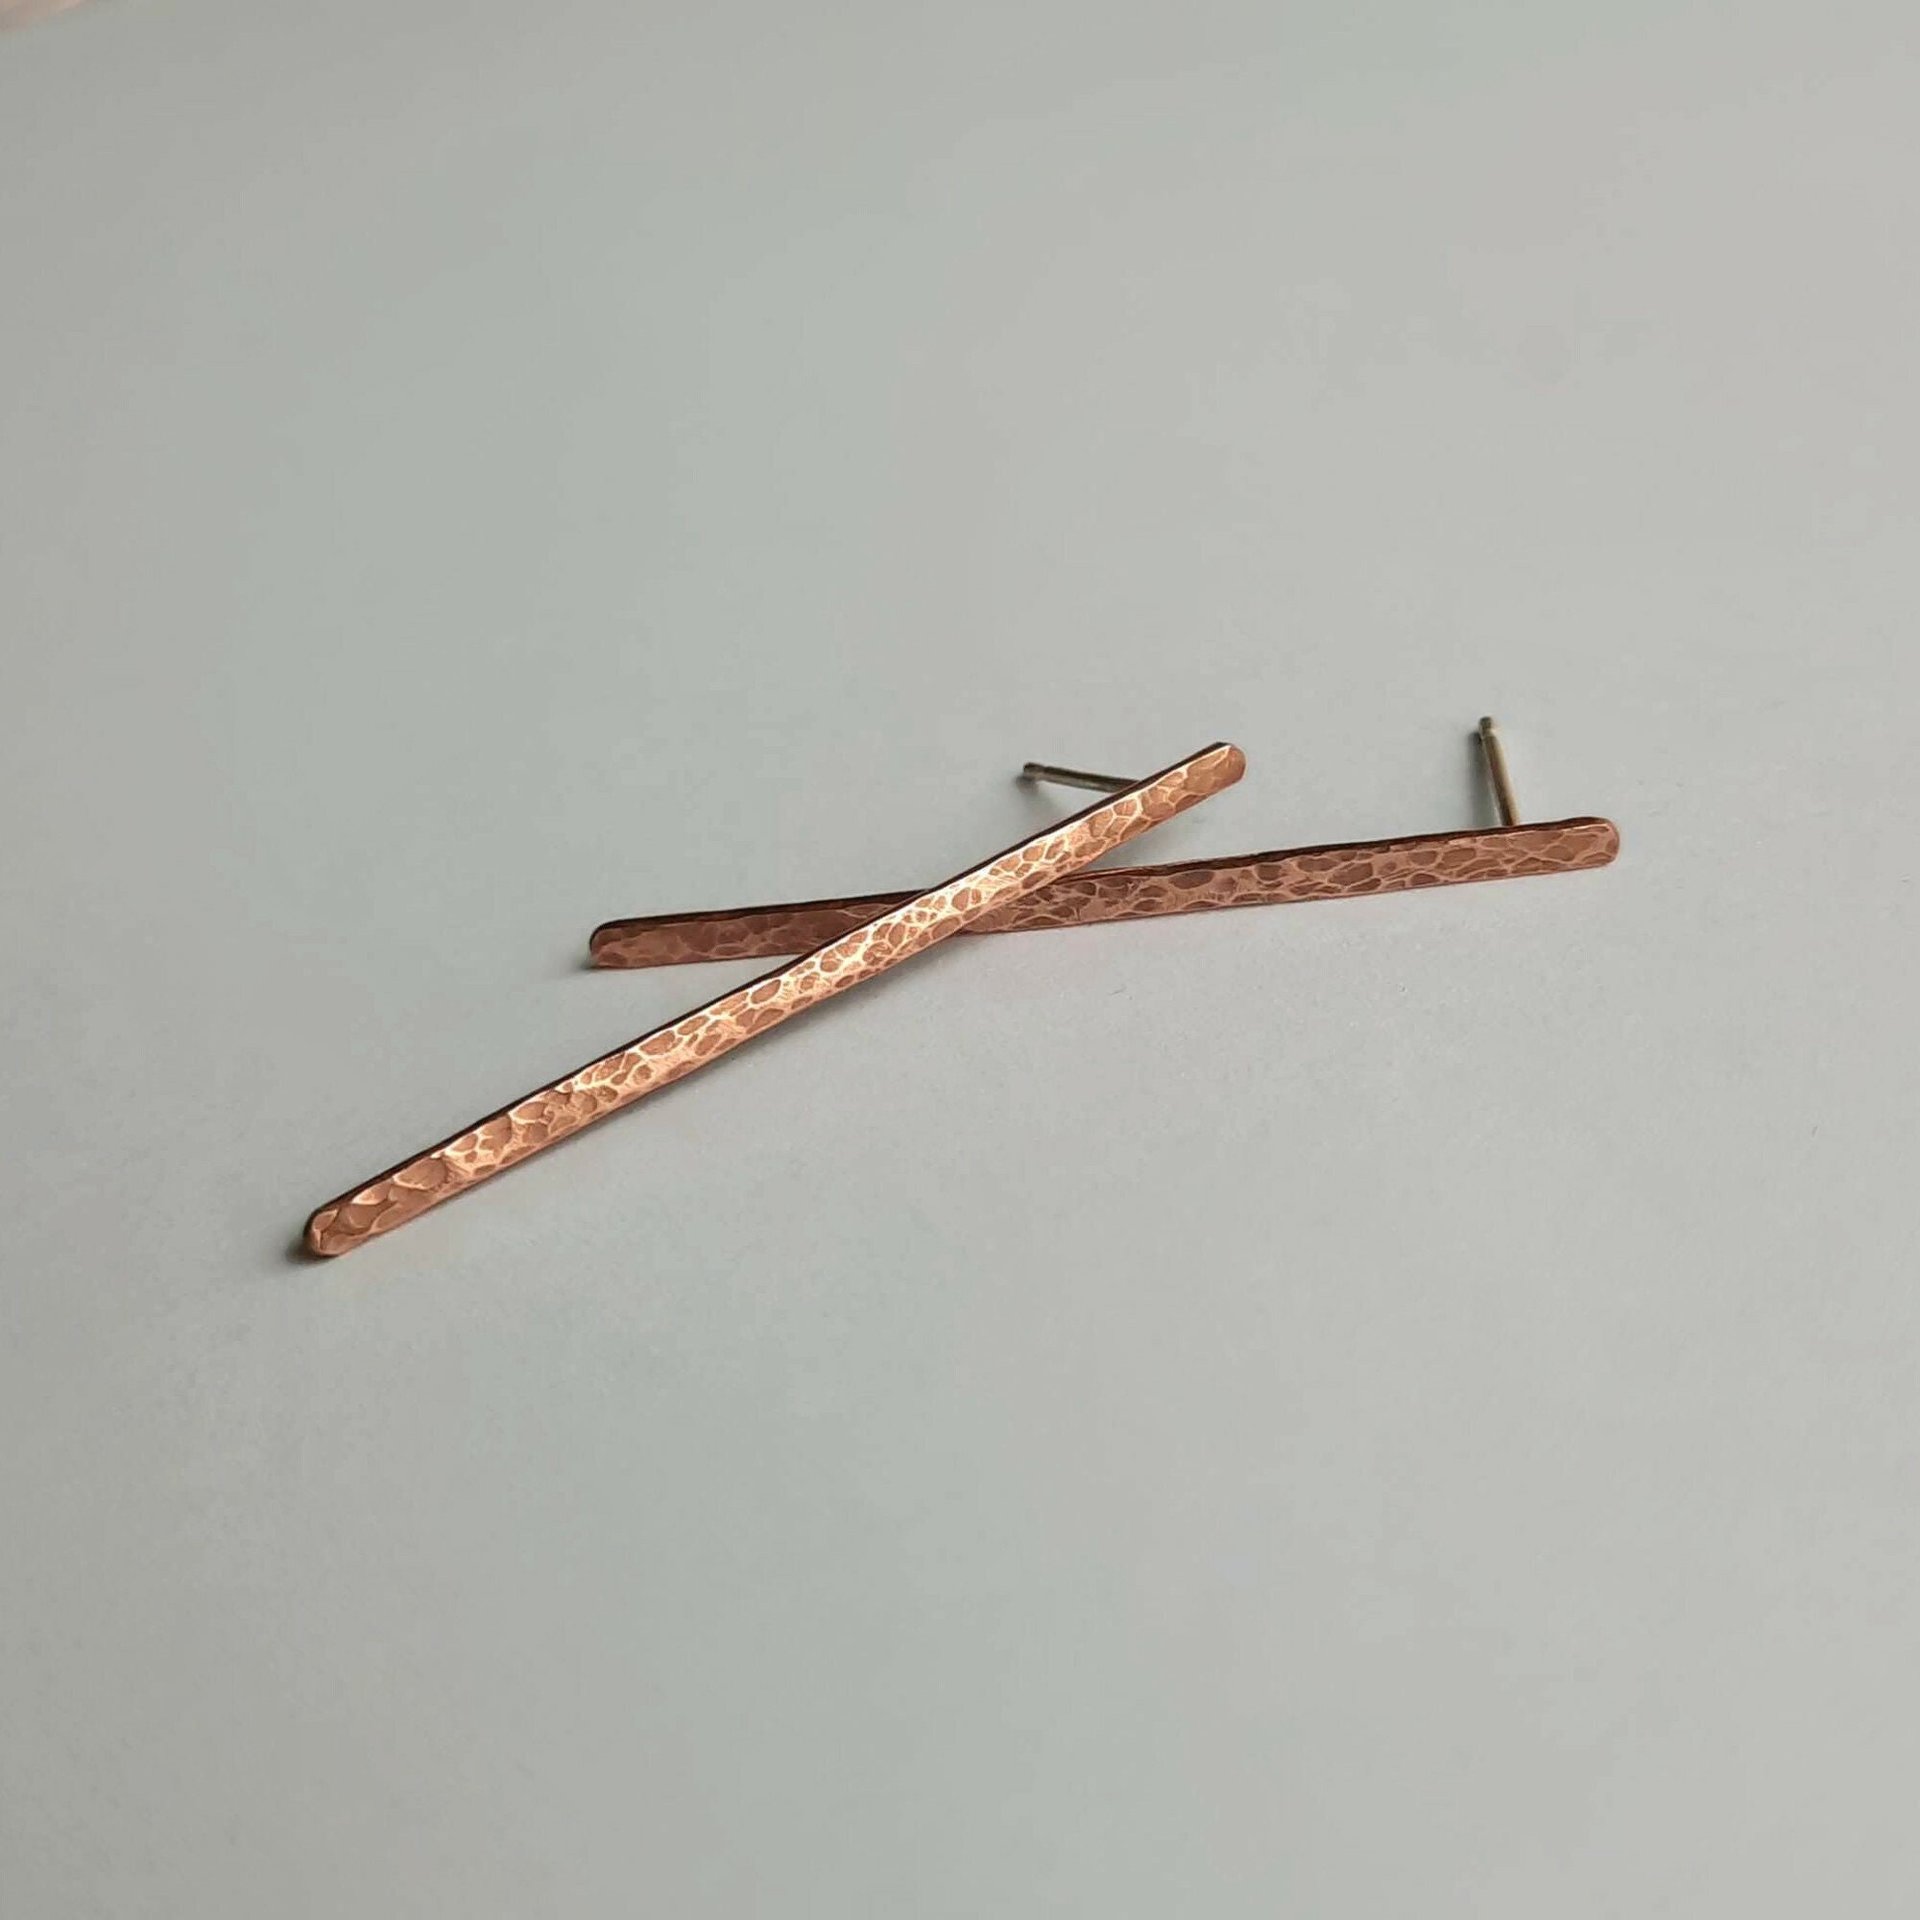 Hammered and Textured Copper and Sterling Silver Stick Earrings ~ Handmade by The Tiny Tree Frog Jewellery